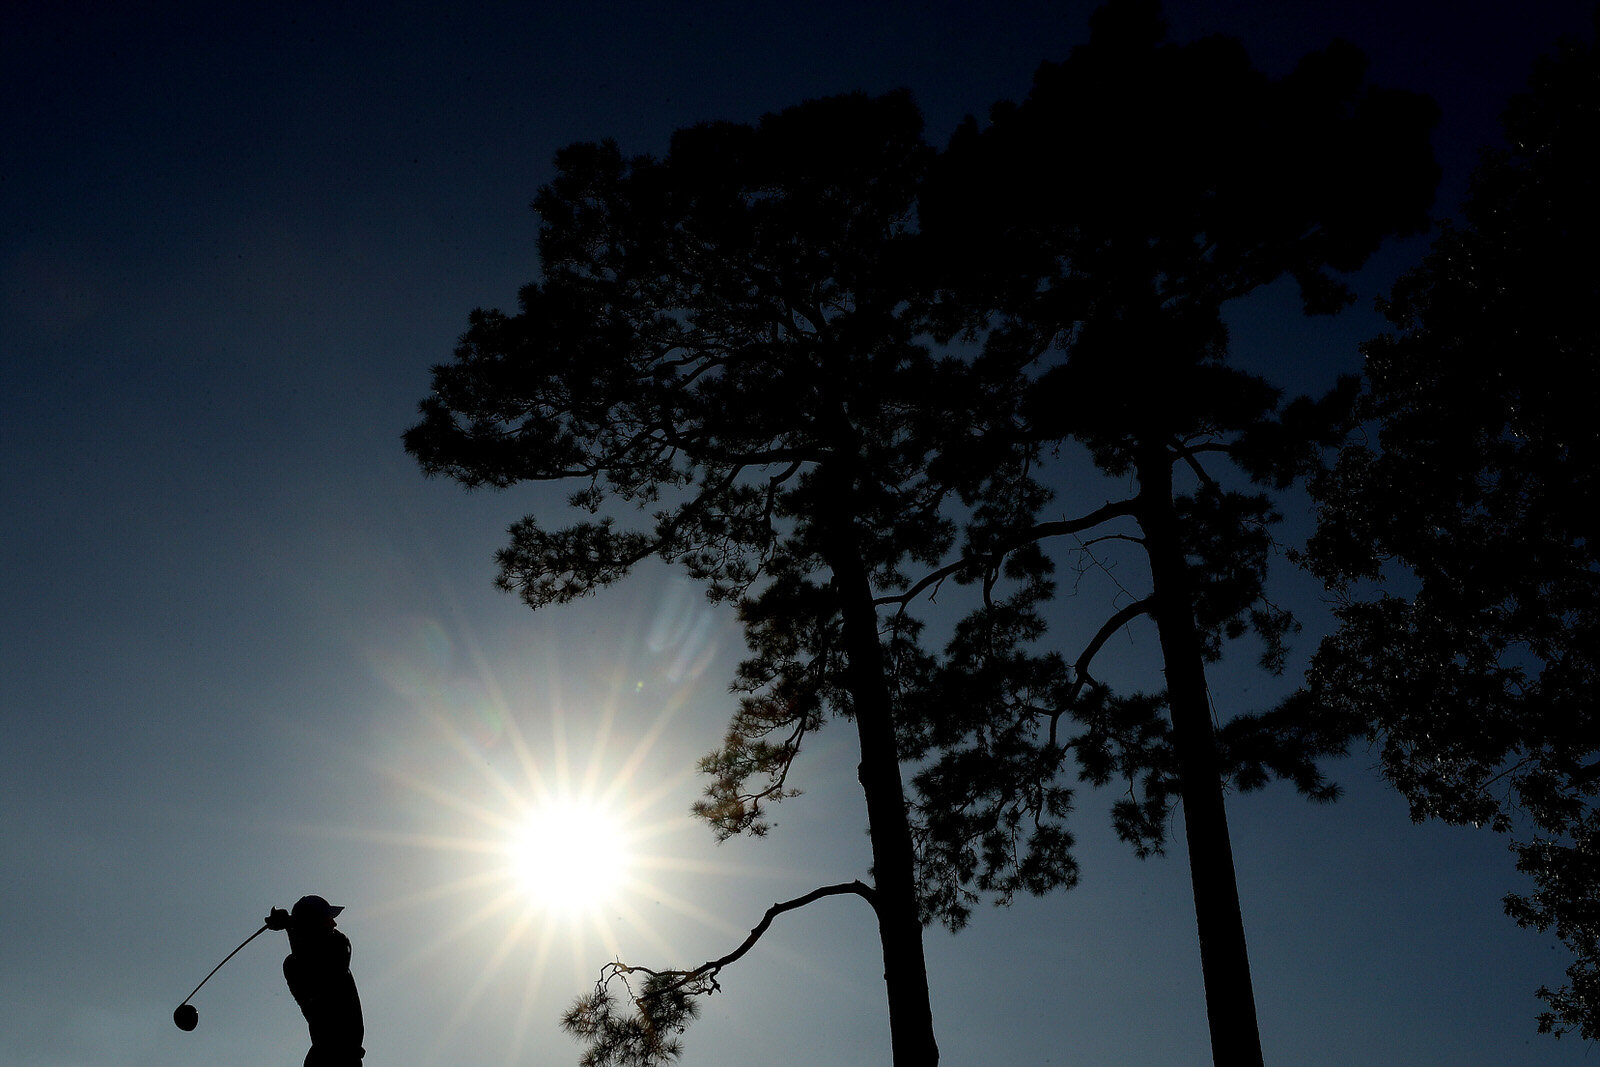  HOUSTON, TEXAS - NOVEMBER 06: Jordan Spieth of the United States plays his shot from the fifth tee during the second round of the Houston Open at Memorial Park Golf Course on November 06, 2020 in Houston, Texas. (Photo by Maddie Meyer/Getty Images) 